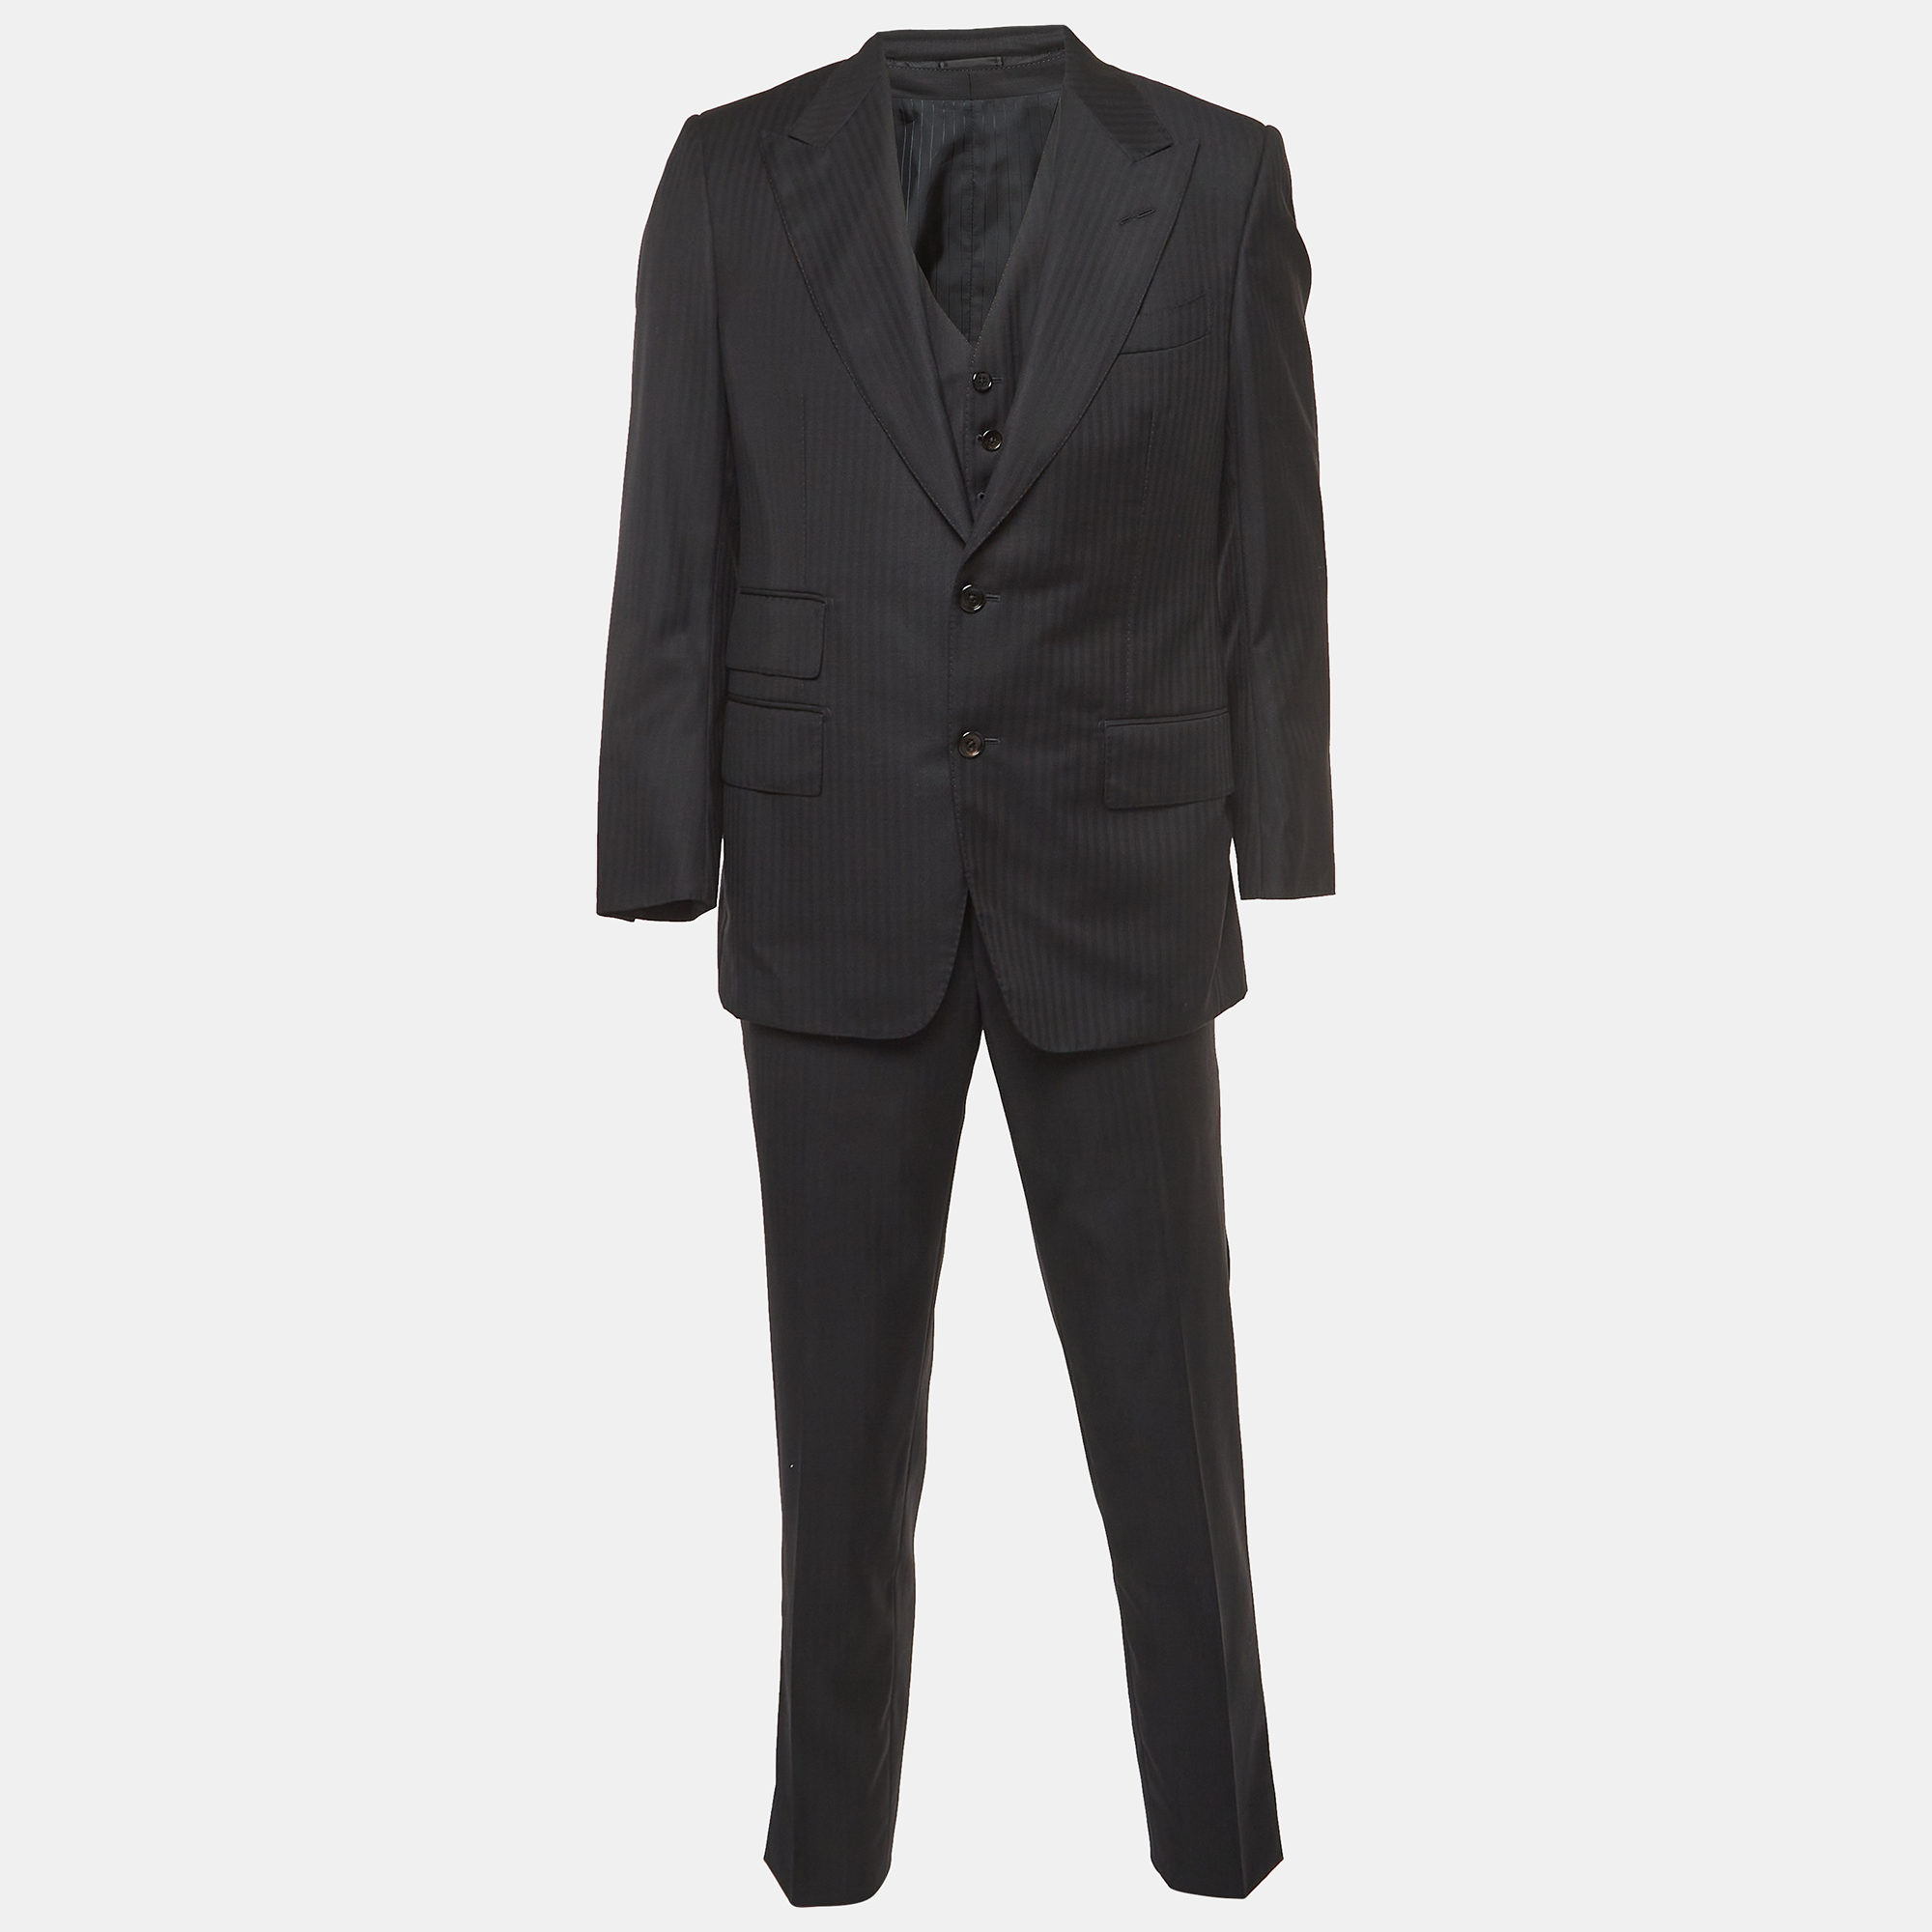 

Tom Ford Black Pinstripe Wool Single Breasted 3 Piece Suit